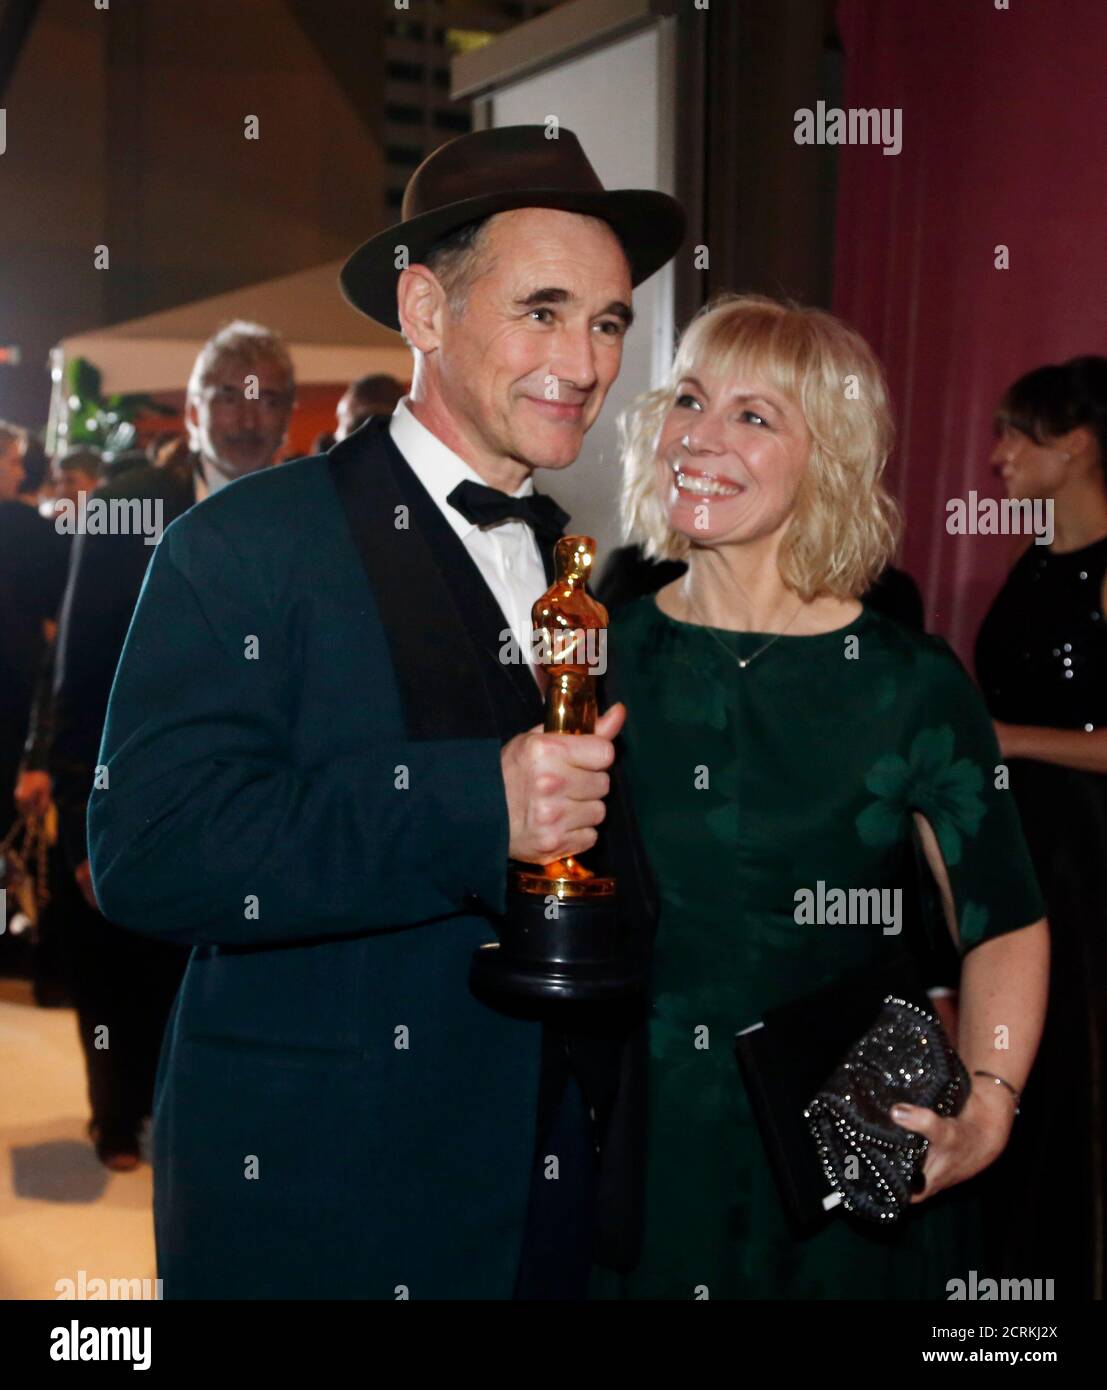 Mark Rylance, winner for Best Supporting Actor for his role in 'Bridge of Spies', arrives with his wife playwright Claire van Kampen at the Governors Ball following the 88th Academy Awards in Hollywood, California February 28, 2016.  REUTERS/Lucy Nicholson Stock Photo